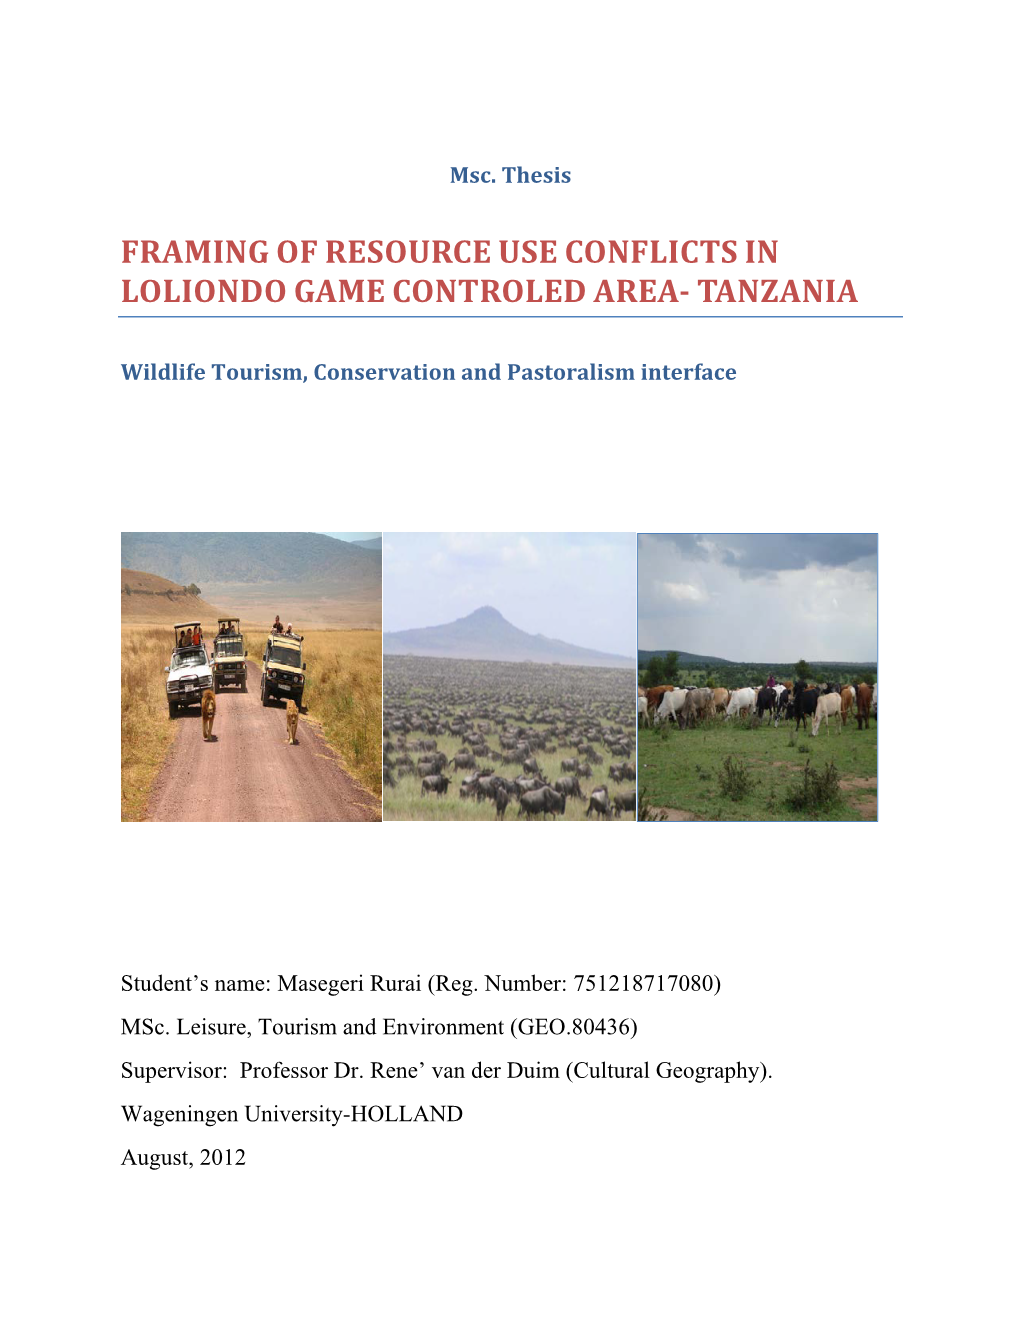 Framing of Resource Use Conflicts in Loliondo Game Controled Area- Tanzania